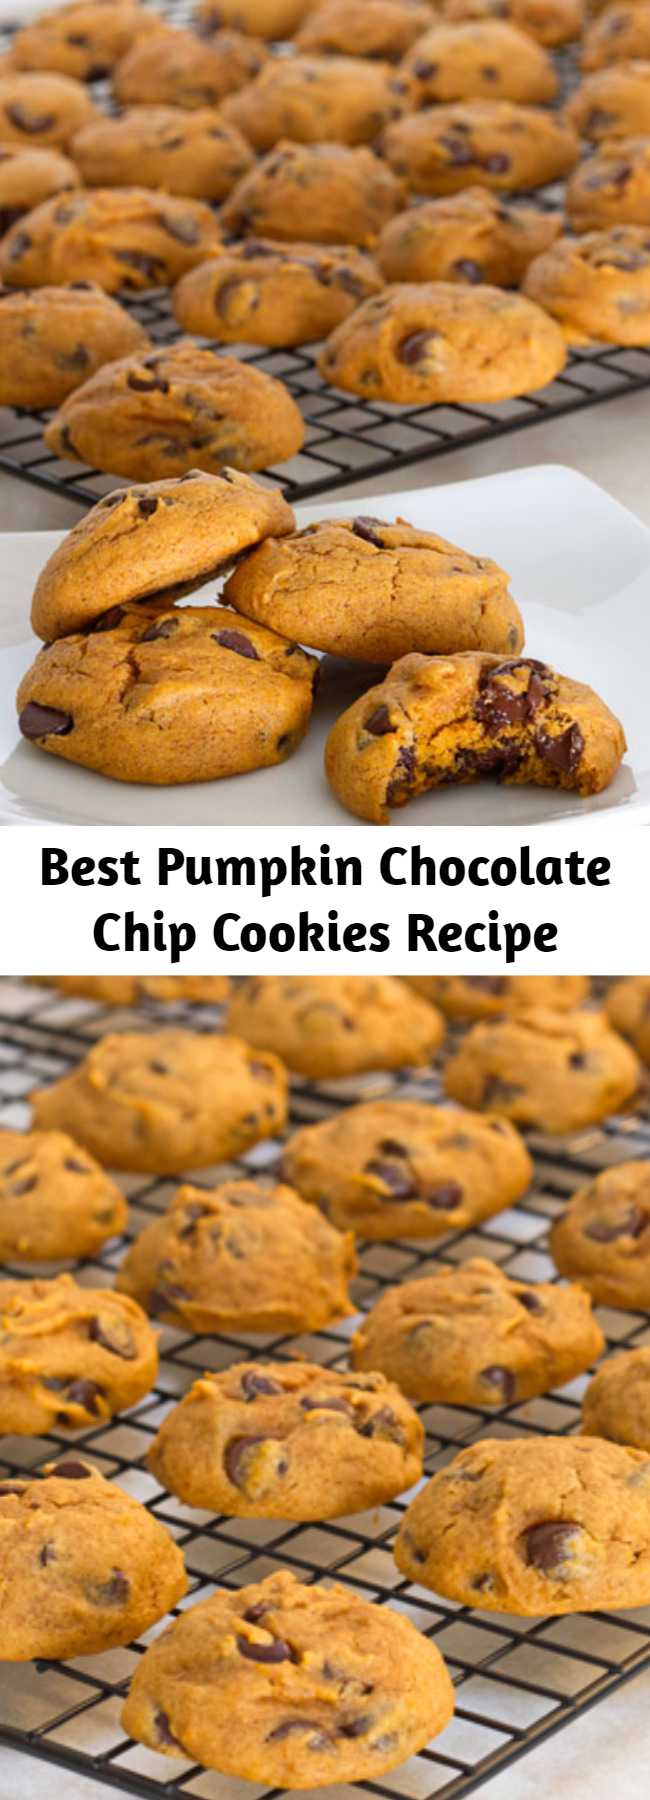 Best Pumpkin Chocolate Chip Cookies Recipe - These pumpkin chocolate chip cookies are the essential fall cookie! Chewy and cake-like, they're sure to be a hit at your next tailgate or fall party!